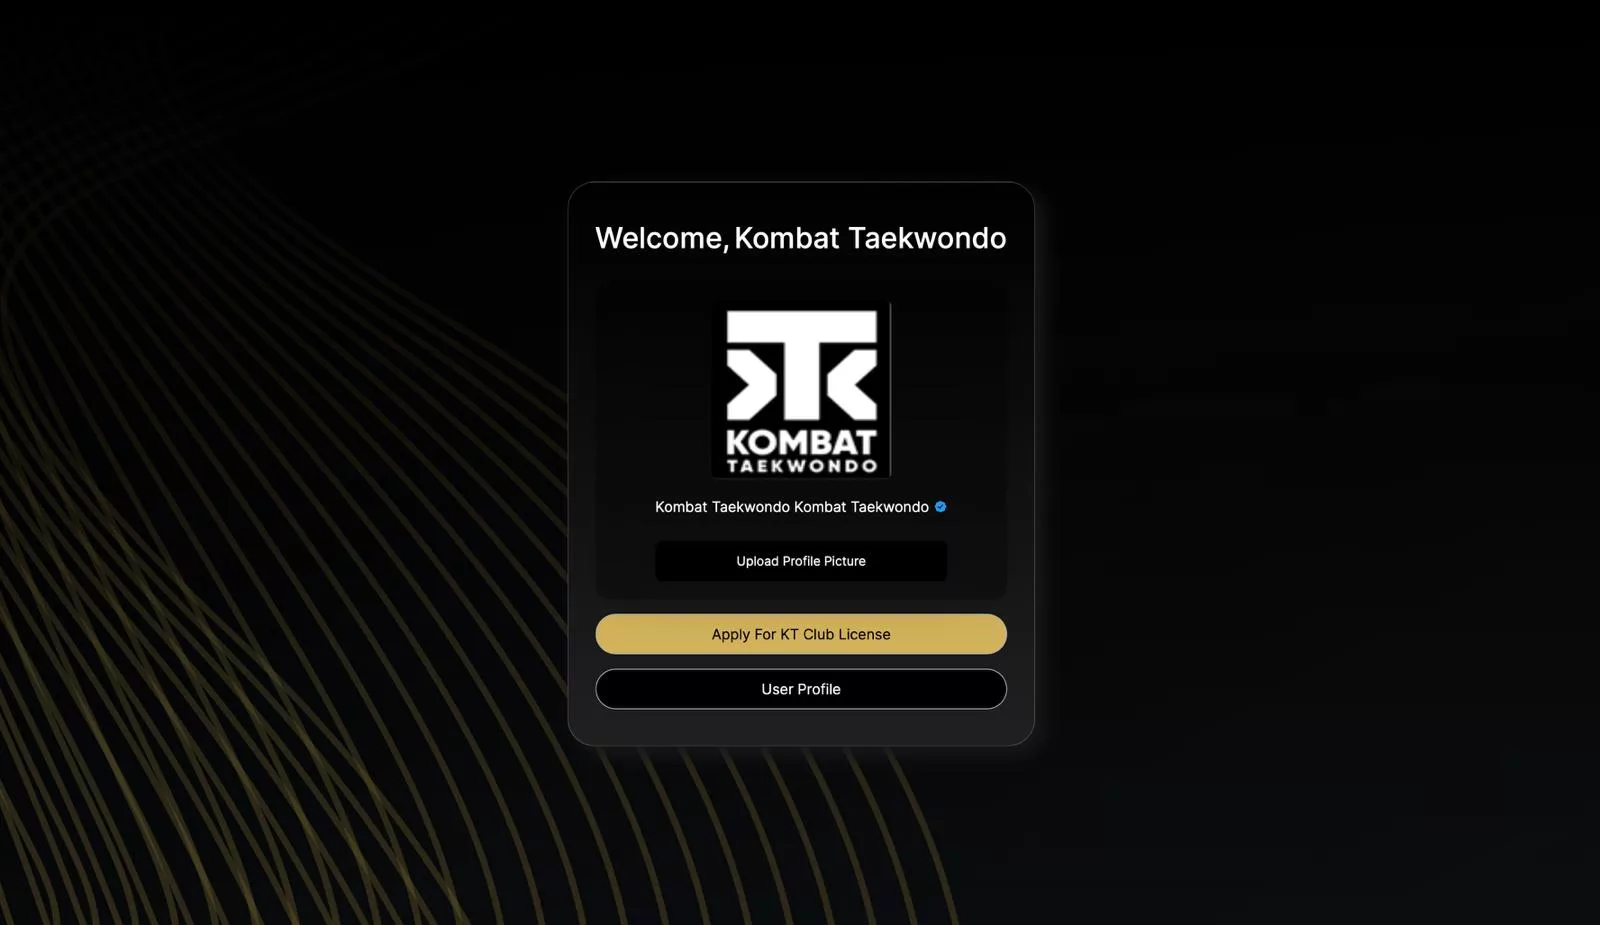 Kombat Taekwondo announces the launch of their state of the art Membership Management System “KTMS”